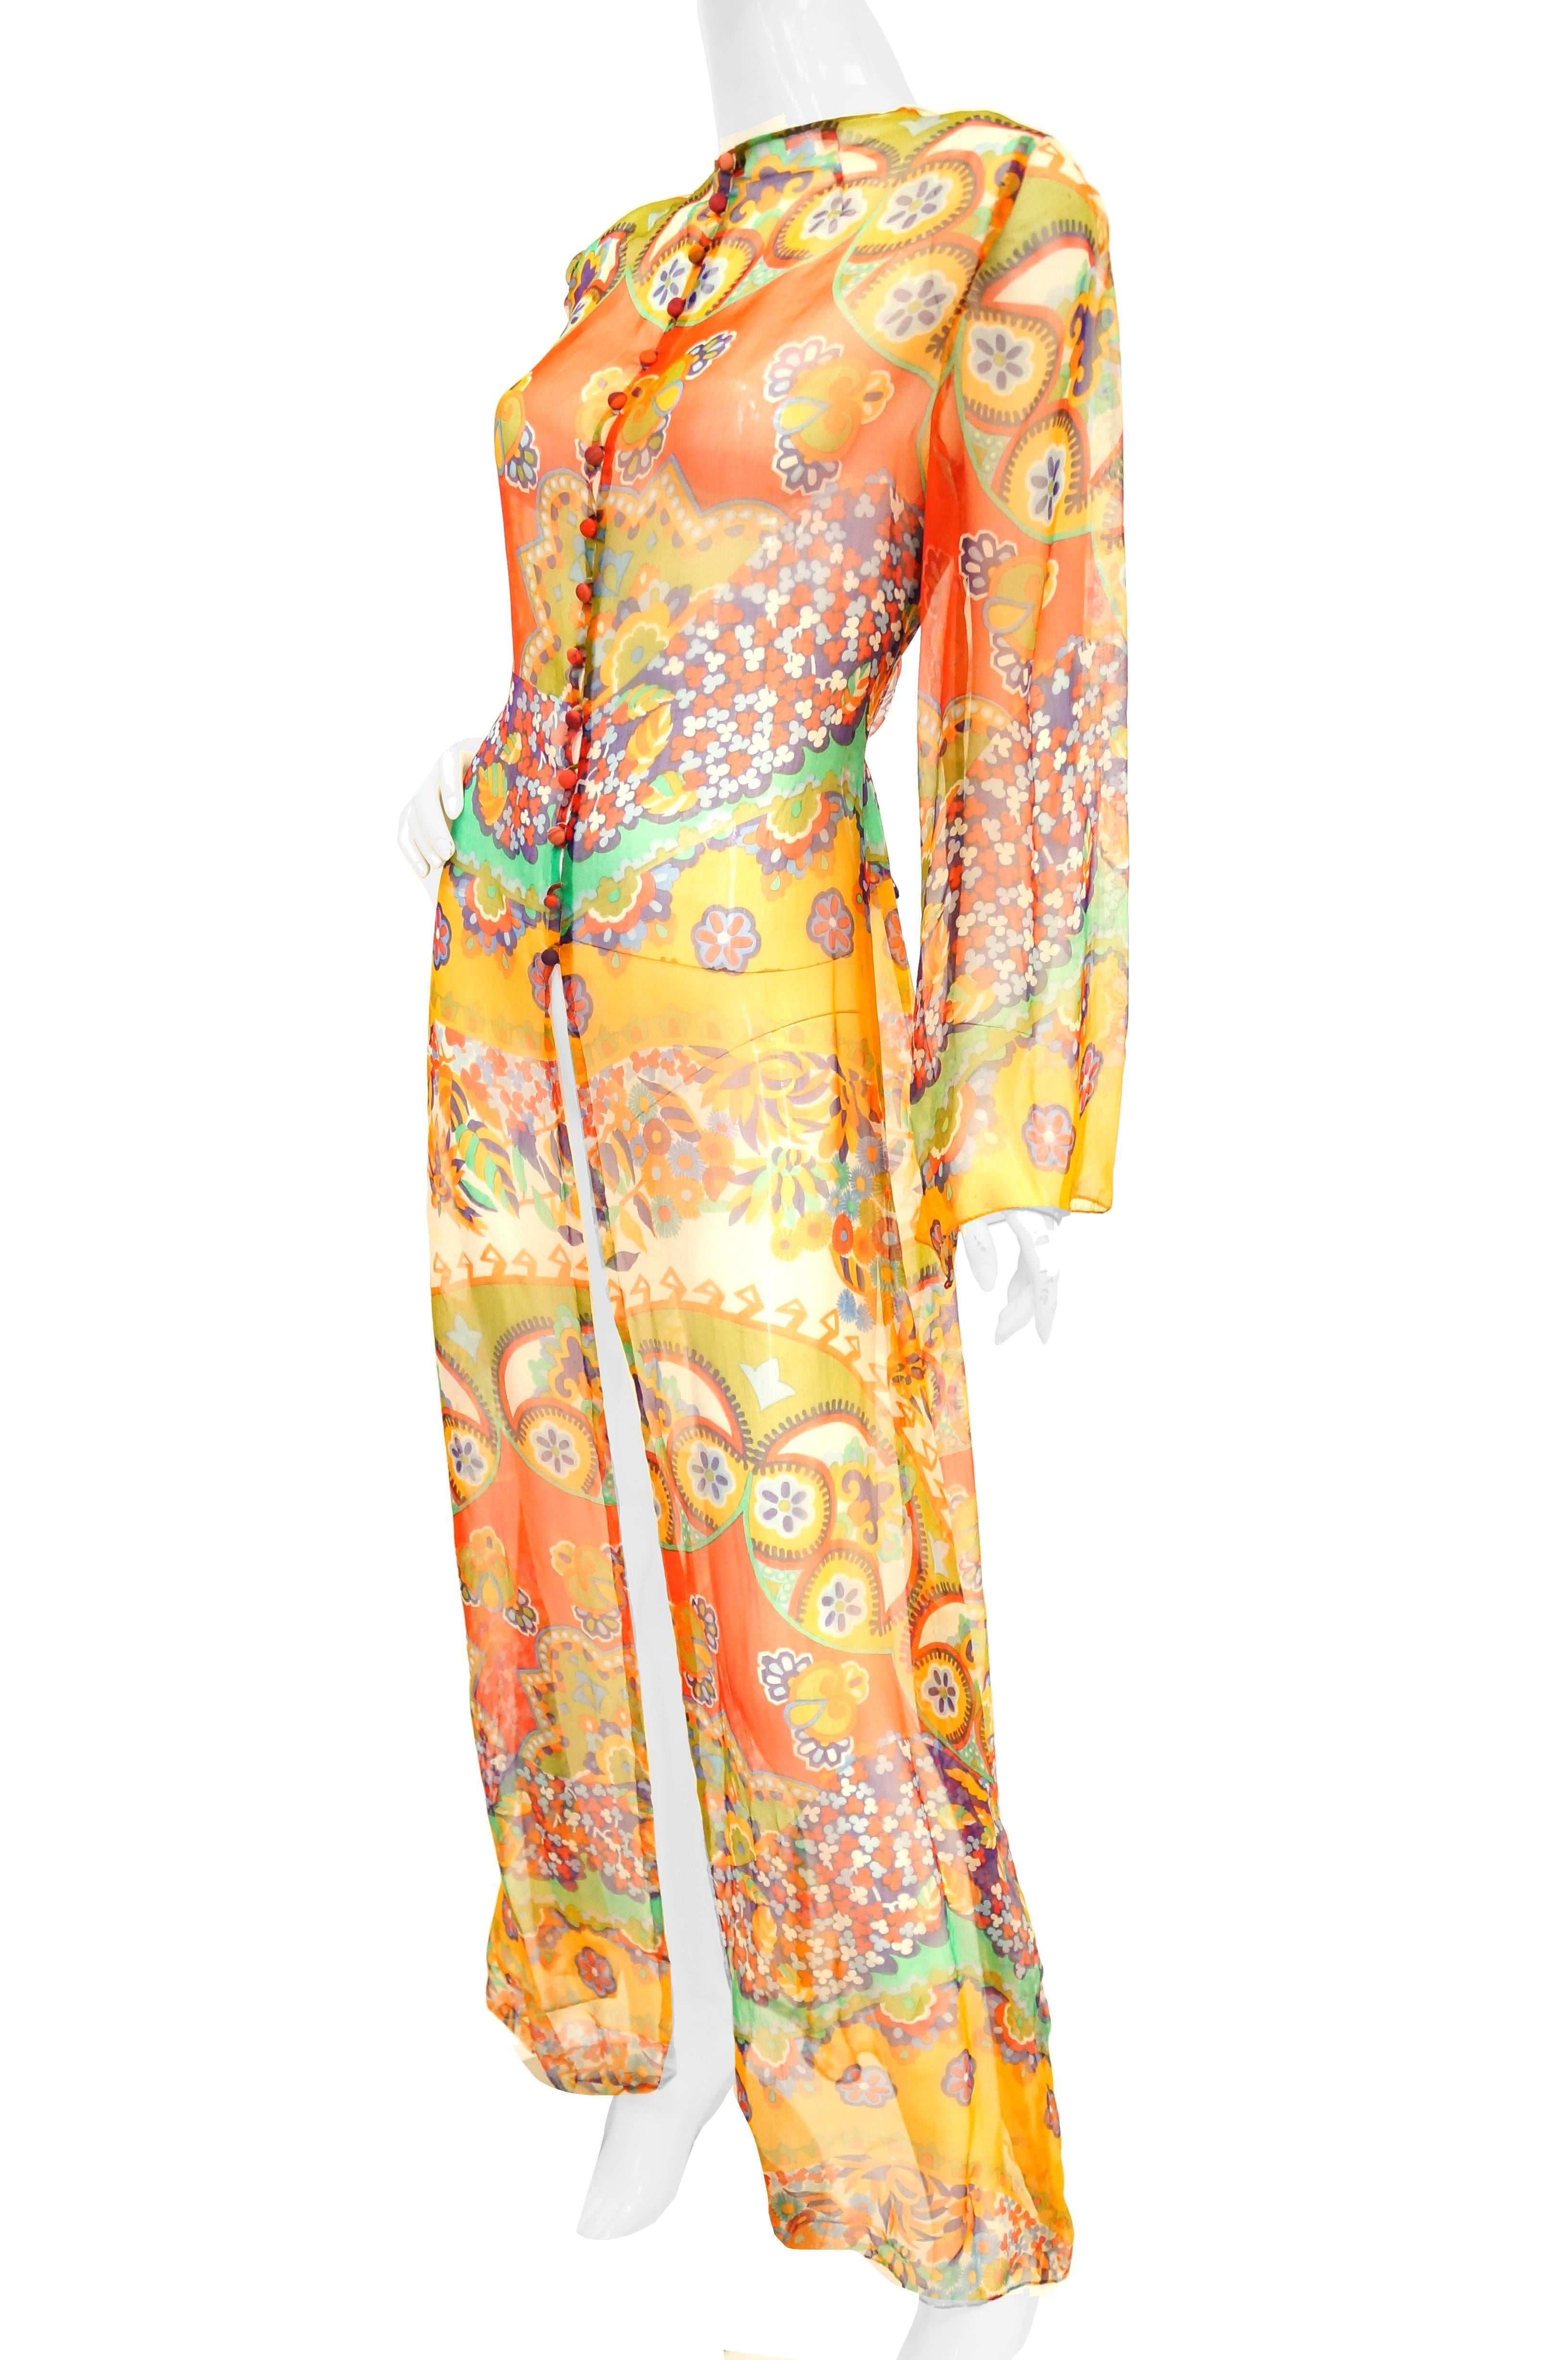 1970s Sheer Polychrome Psychedelic Floral Boho Caftan/Tunic /Cover Up 1